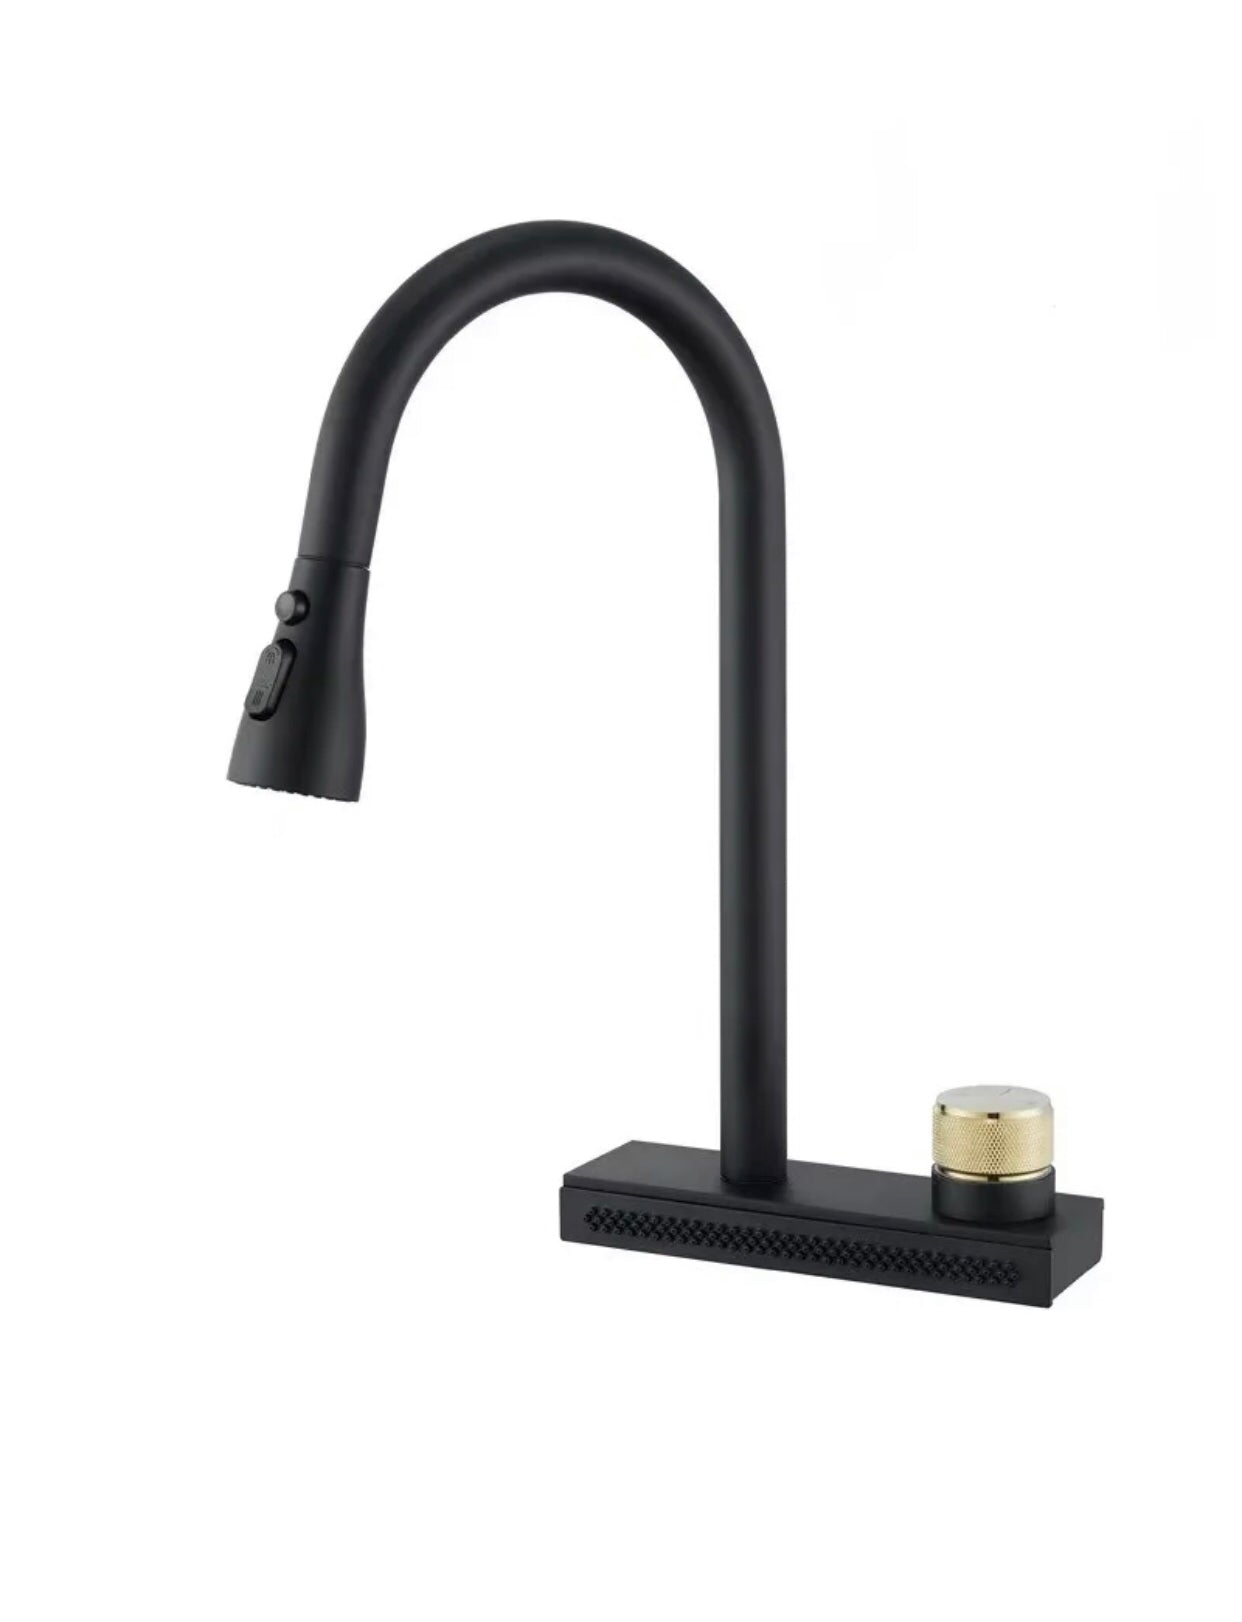 A|M Aquae 304 Stainless Steel Pull-Out Flying Rain Waterfall Single Hole Faucet Outlet (Black)